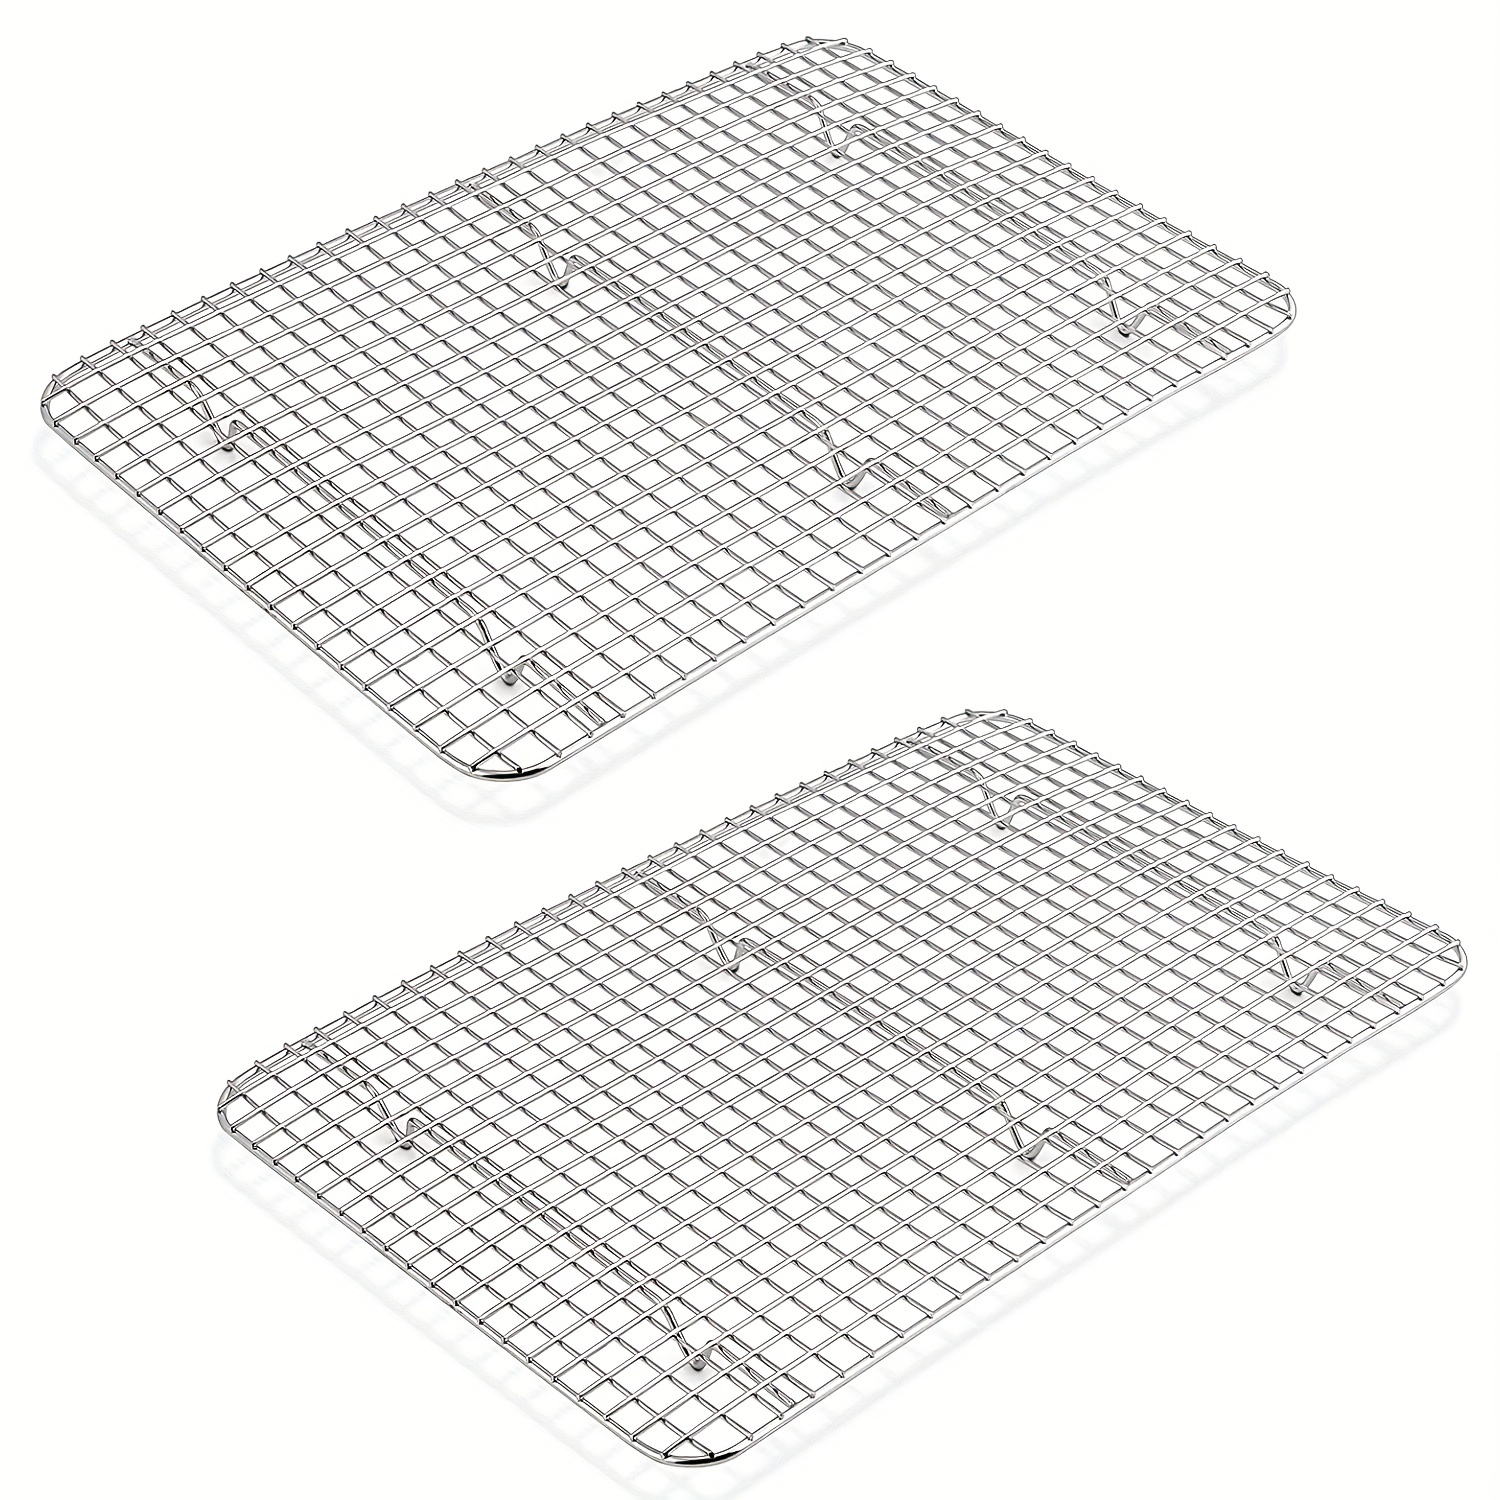 Cooling Rack Set of 2 Stainless Steel Oven Safe Grid Wire Racks Cooking Baking